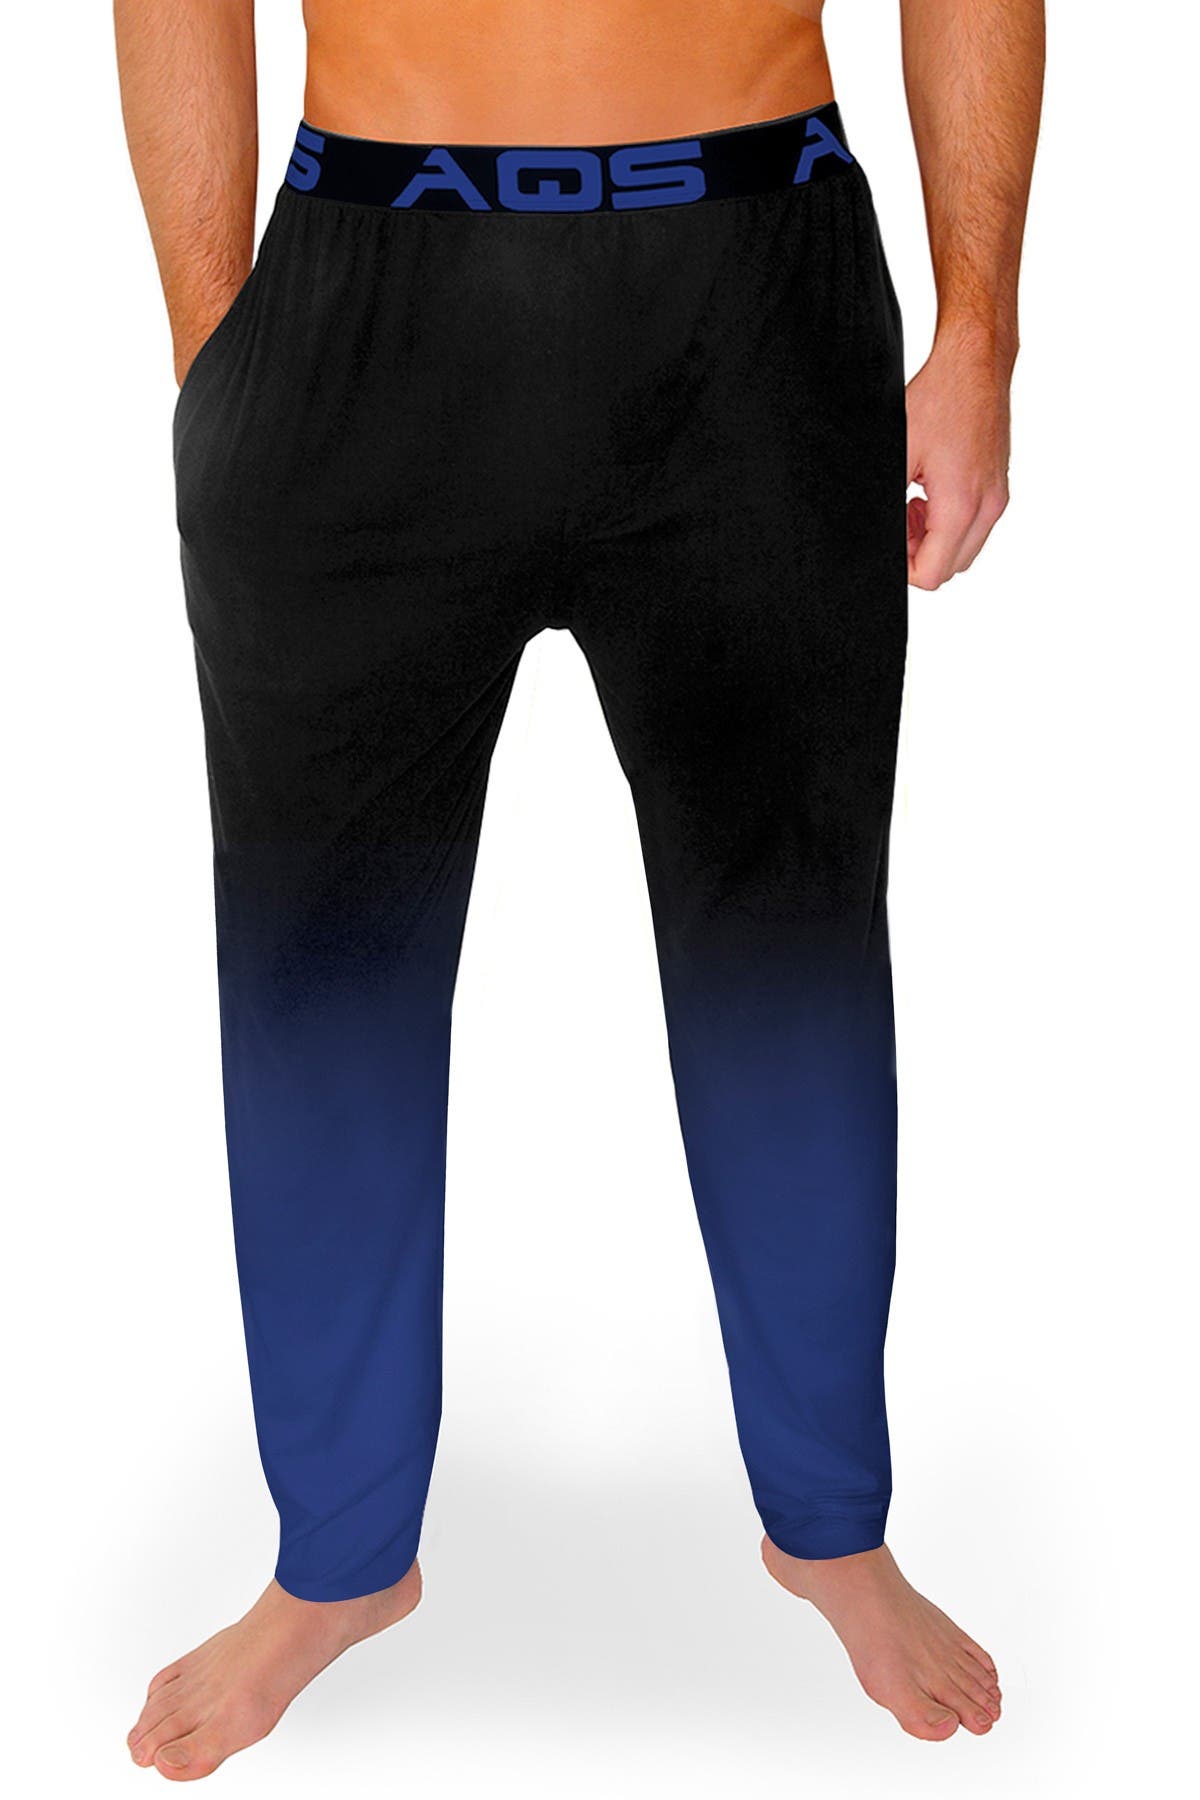 Aqs Ombre Lounge Pants In Black/dark Blue Ombre